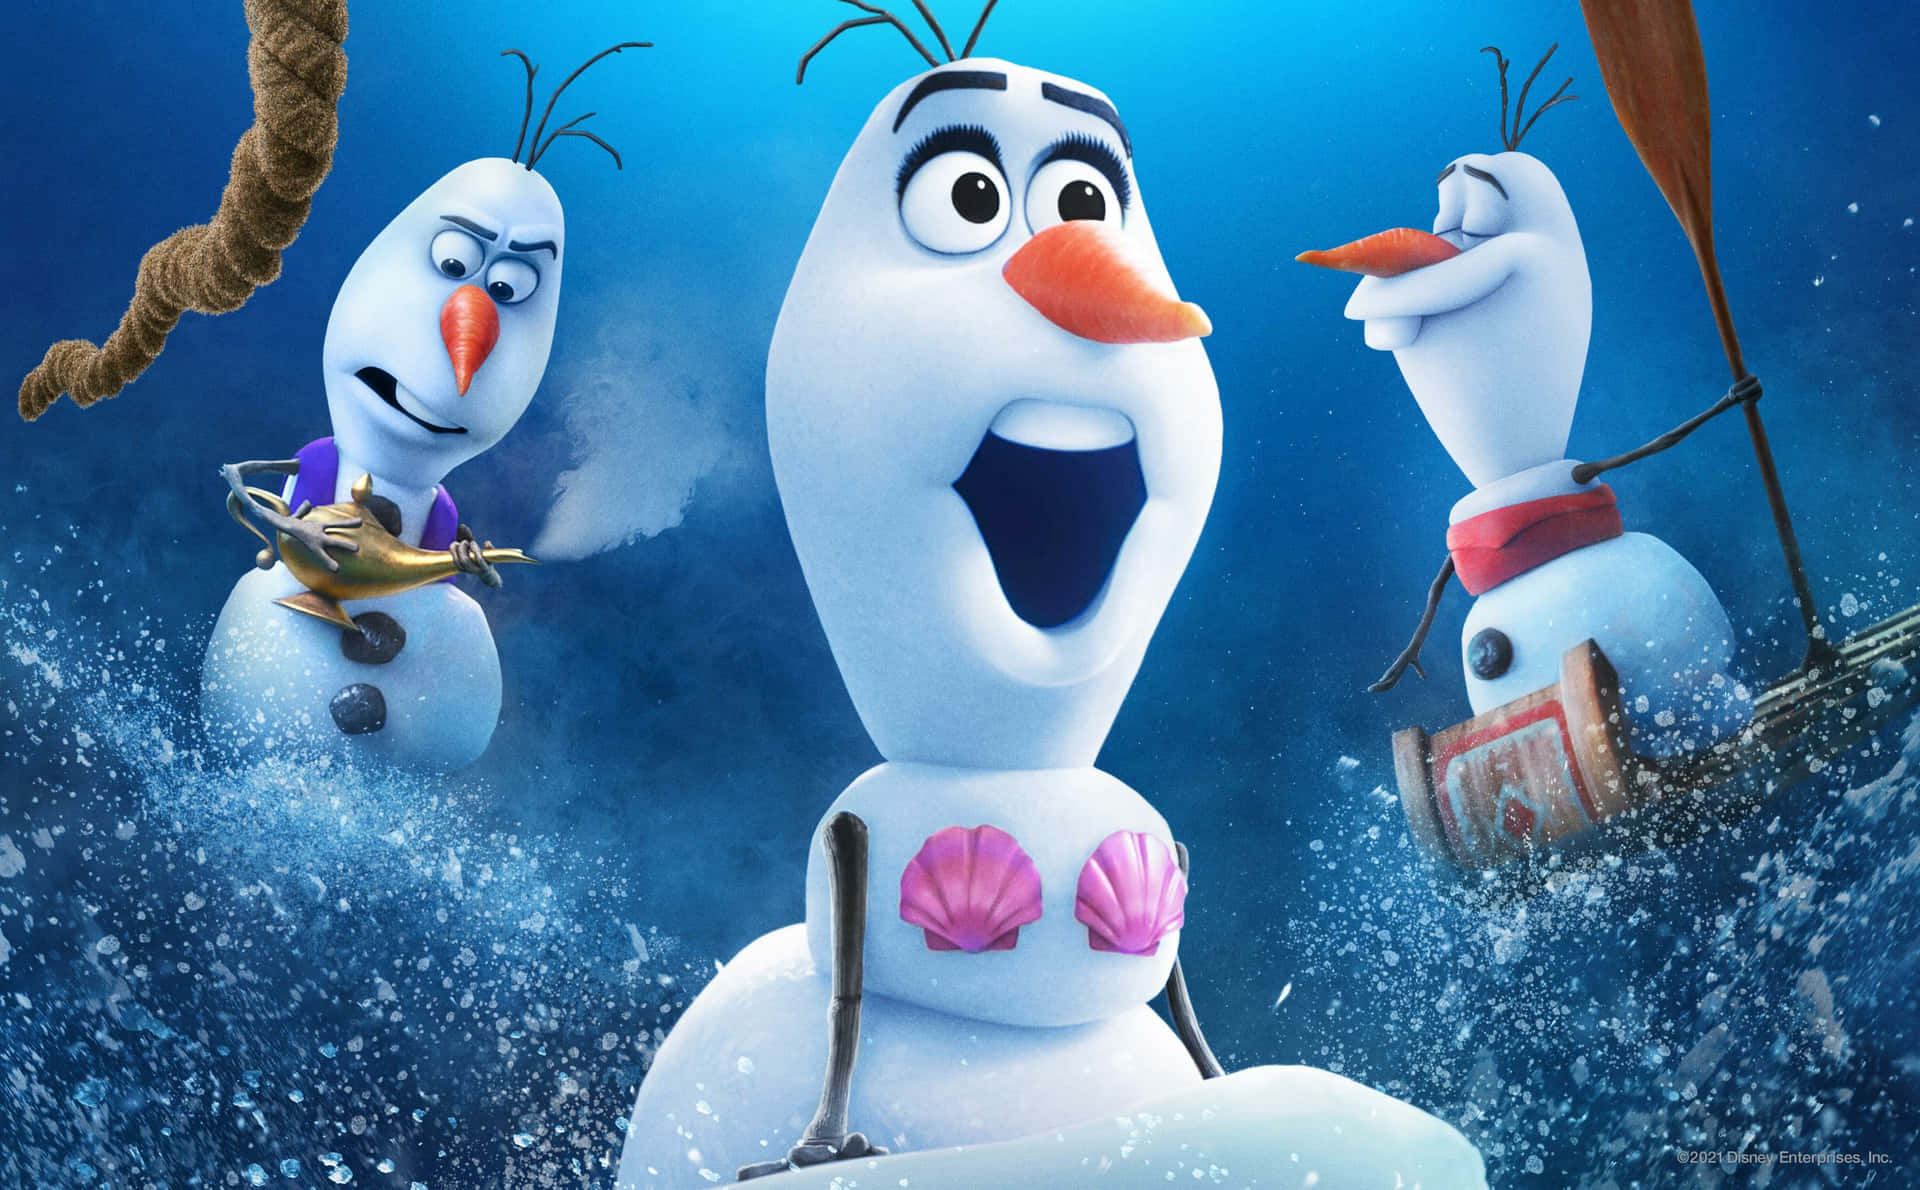 Spread Smiles and Laughter: Olaf